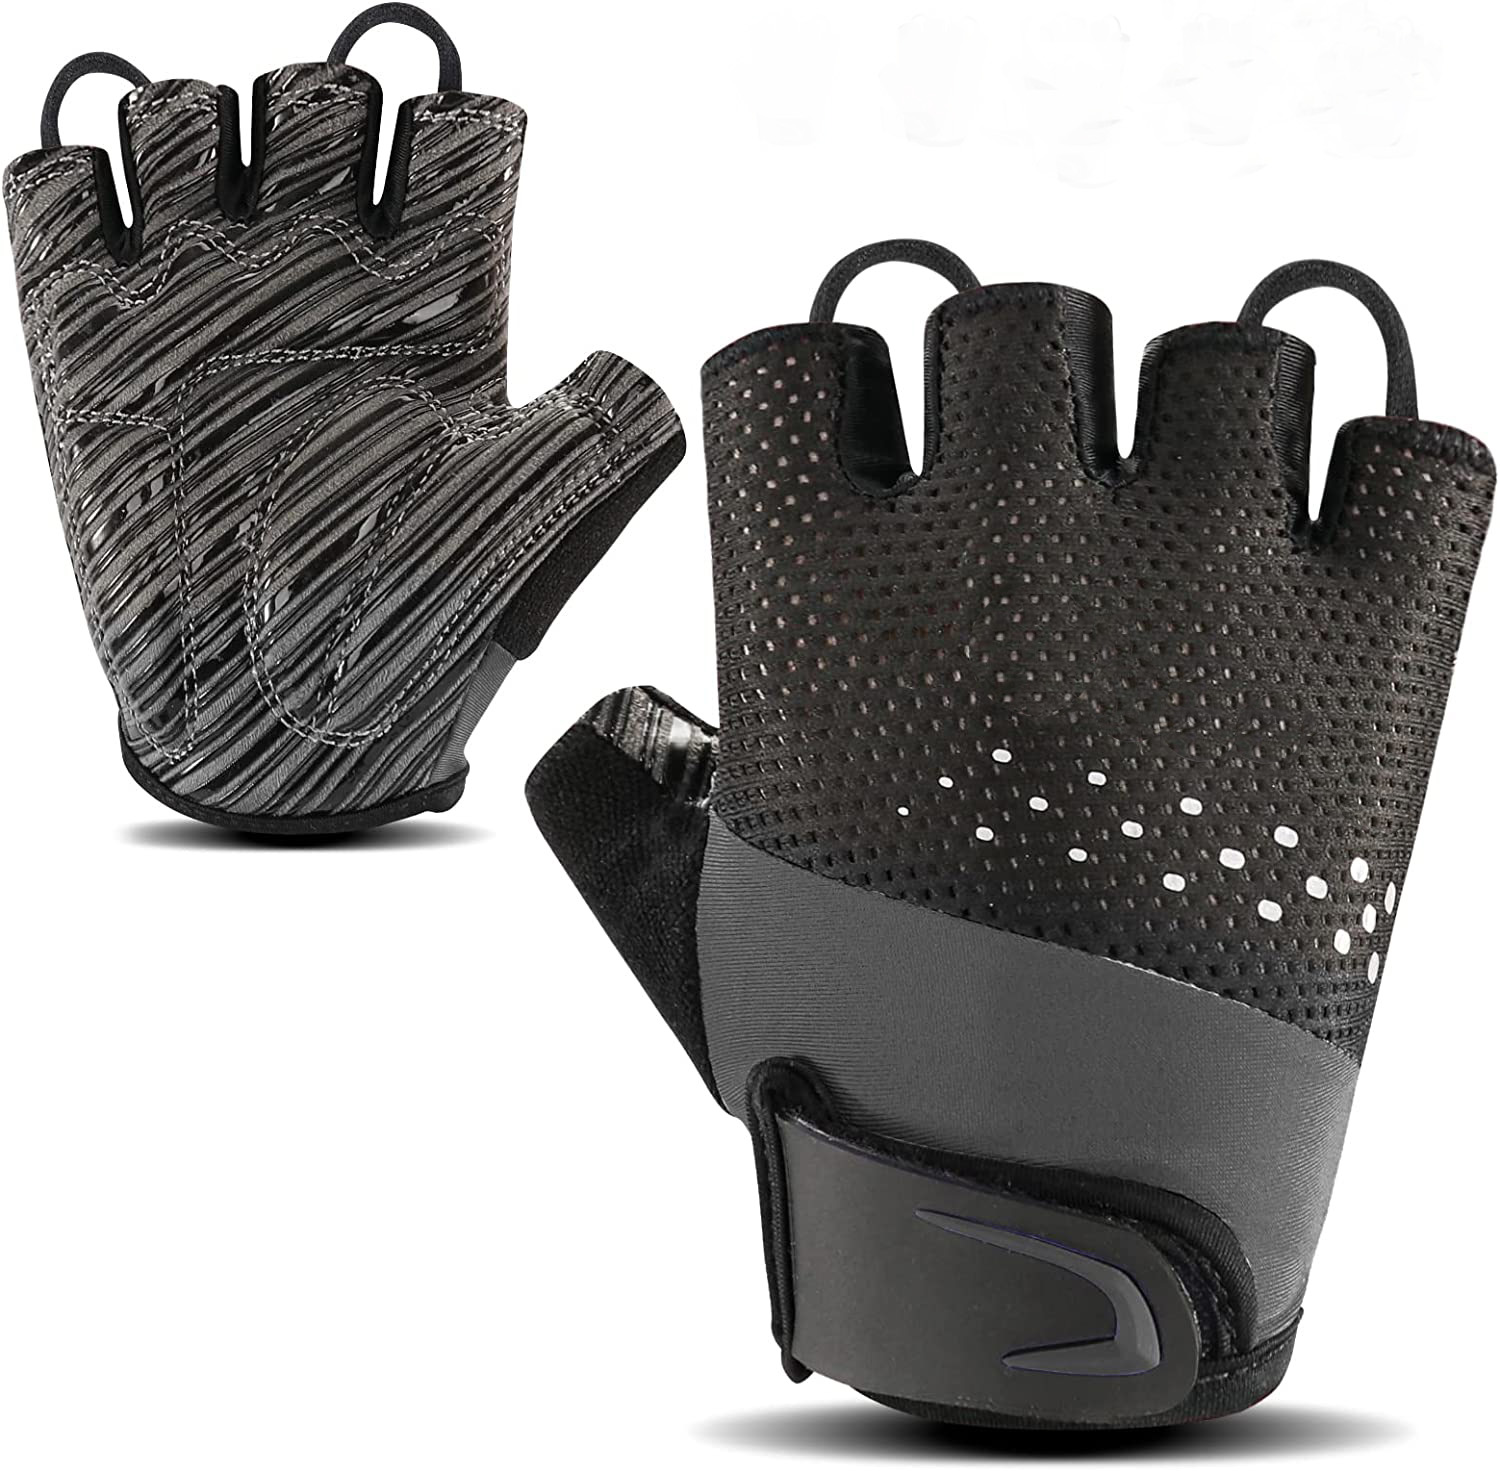 GEL Padding Vibration-Resistant High Elastic Short Fingers Gloves Good Fitness Mountain Bicycle Road